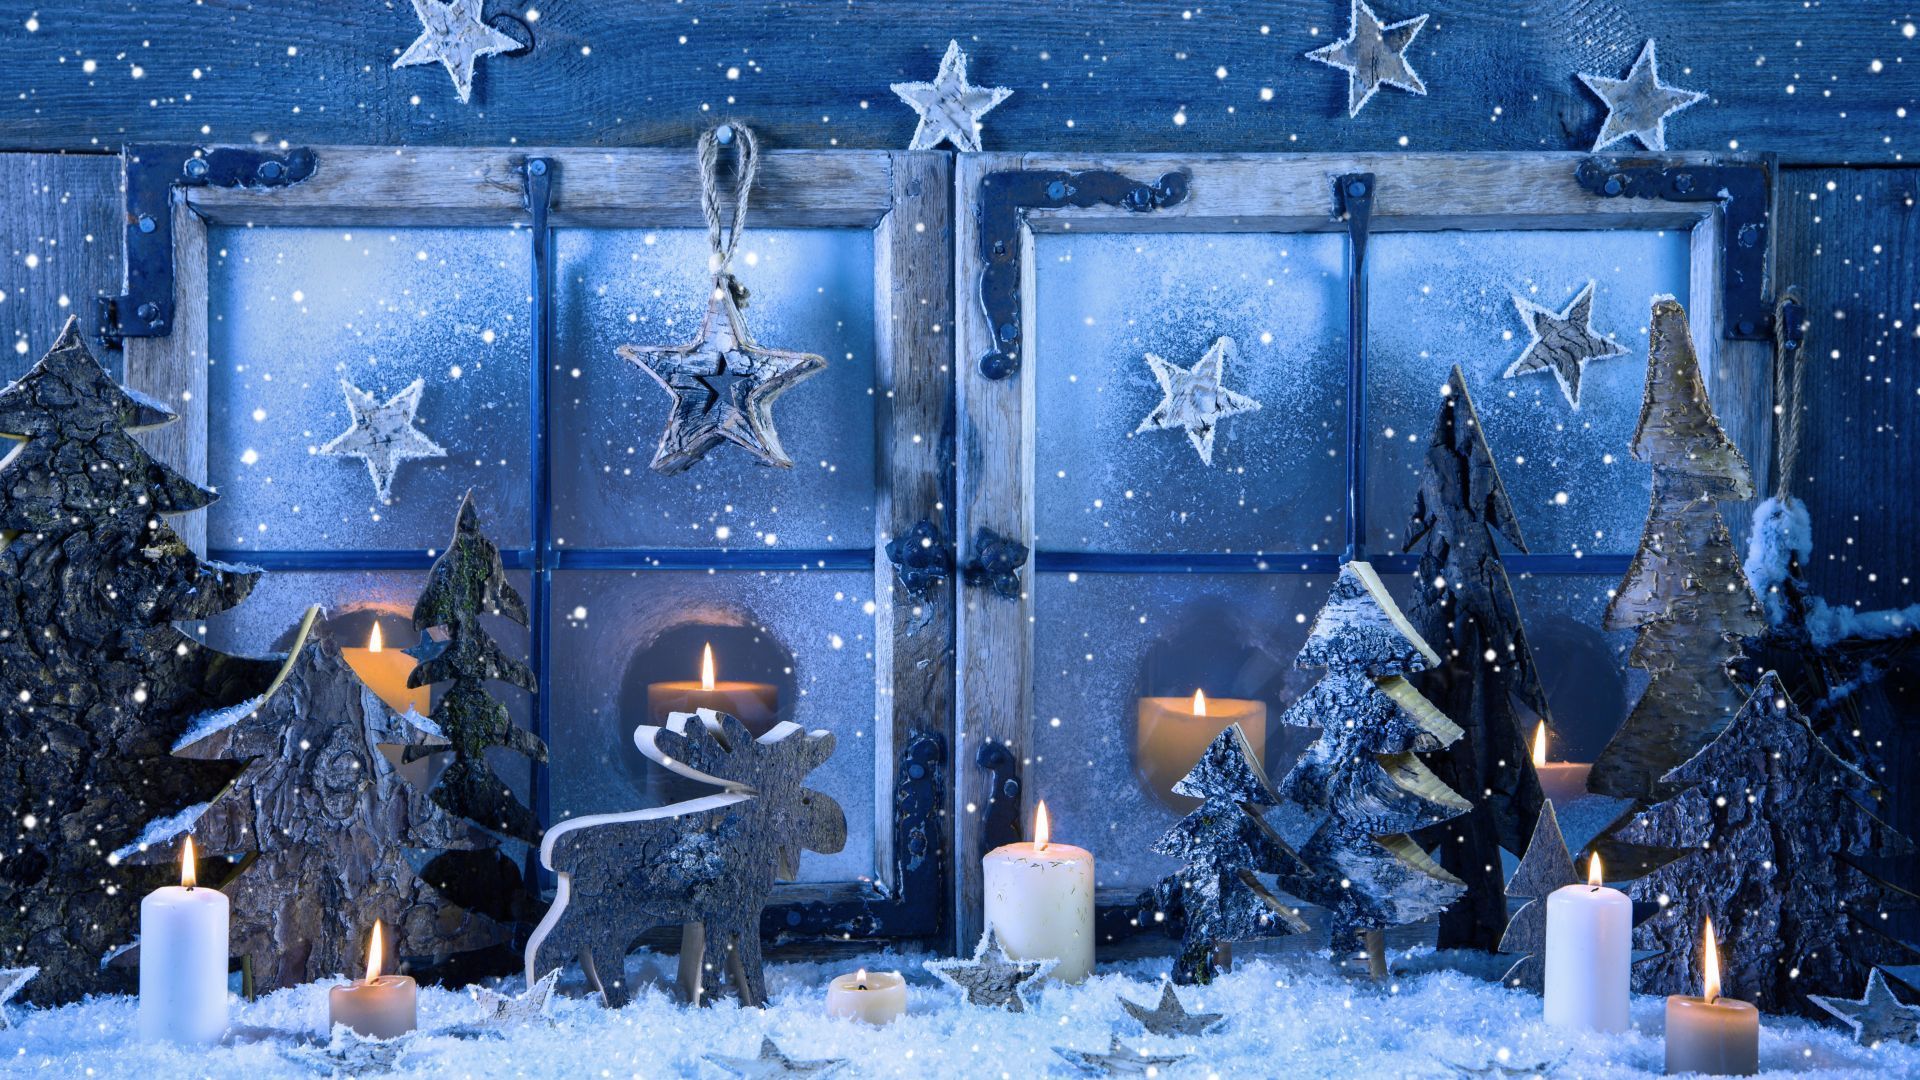 Christmas, New Year, Decorations, Candle, Snow, Fir Tree, Star (horizontal). Candles Wallpaper, Christmas Wallpaper, Christmas Window Decorations